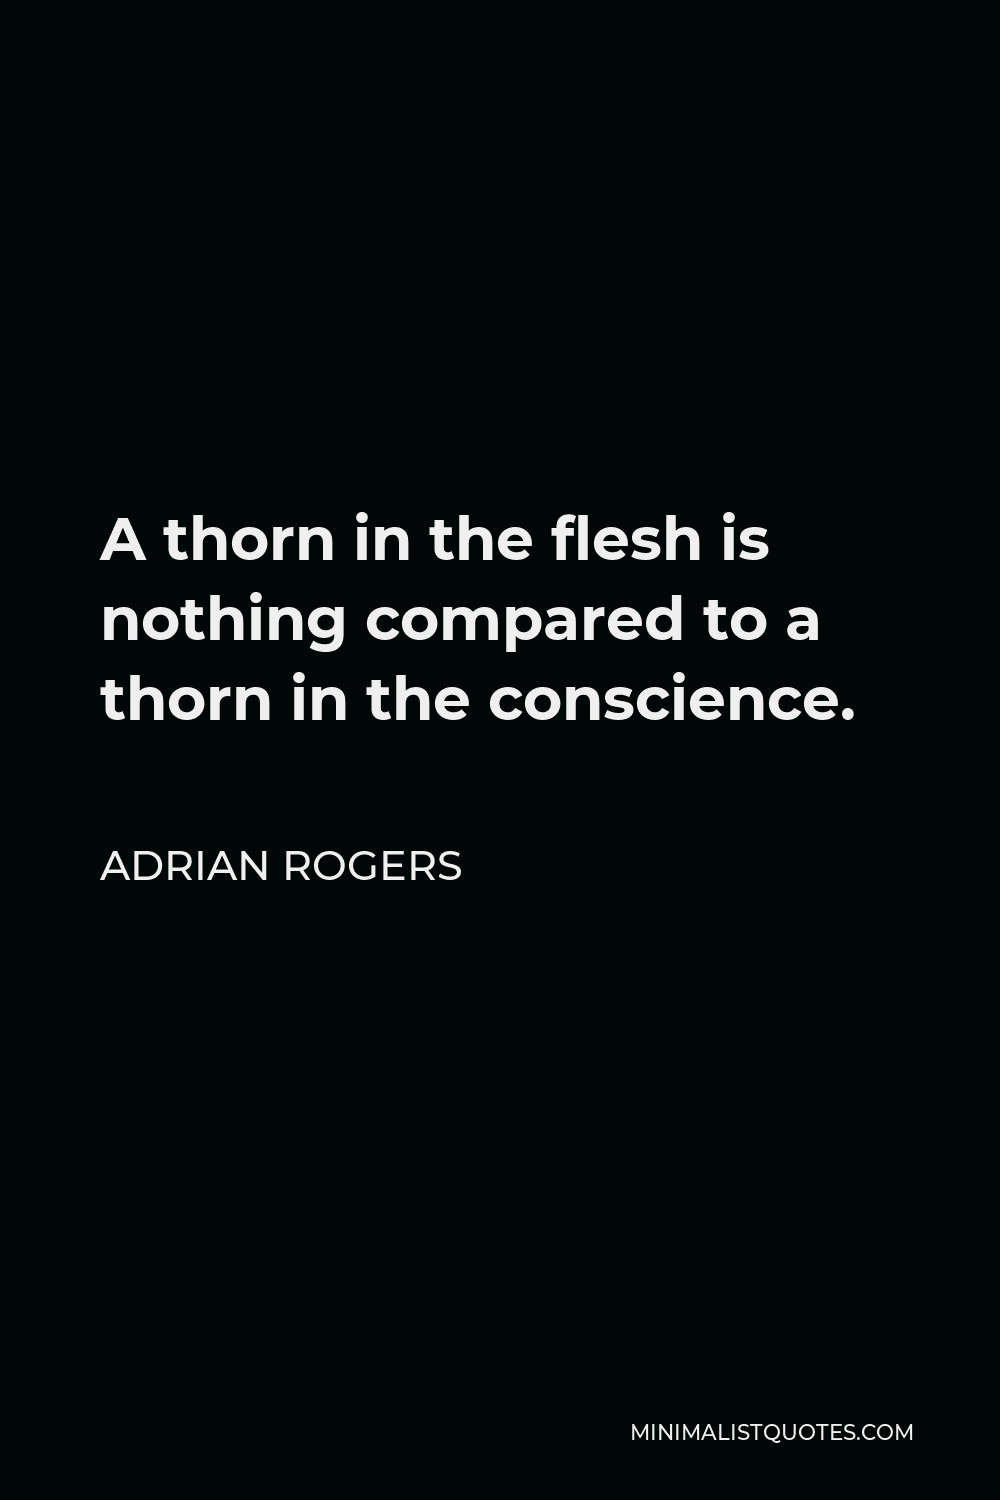 Adrian Rogers Quote - A thorn in the flesh is nothing compared to a thorn in the conscience.